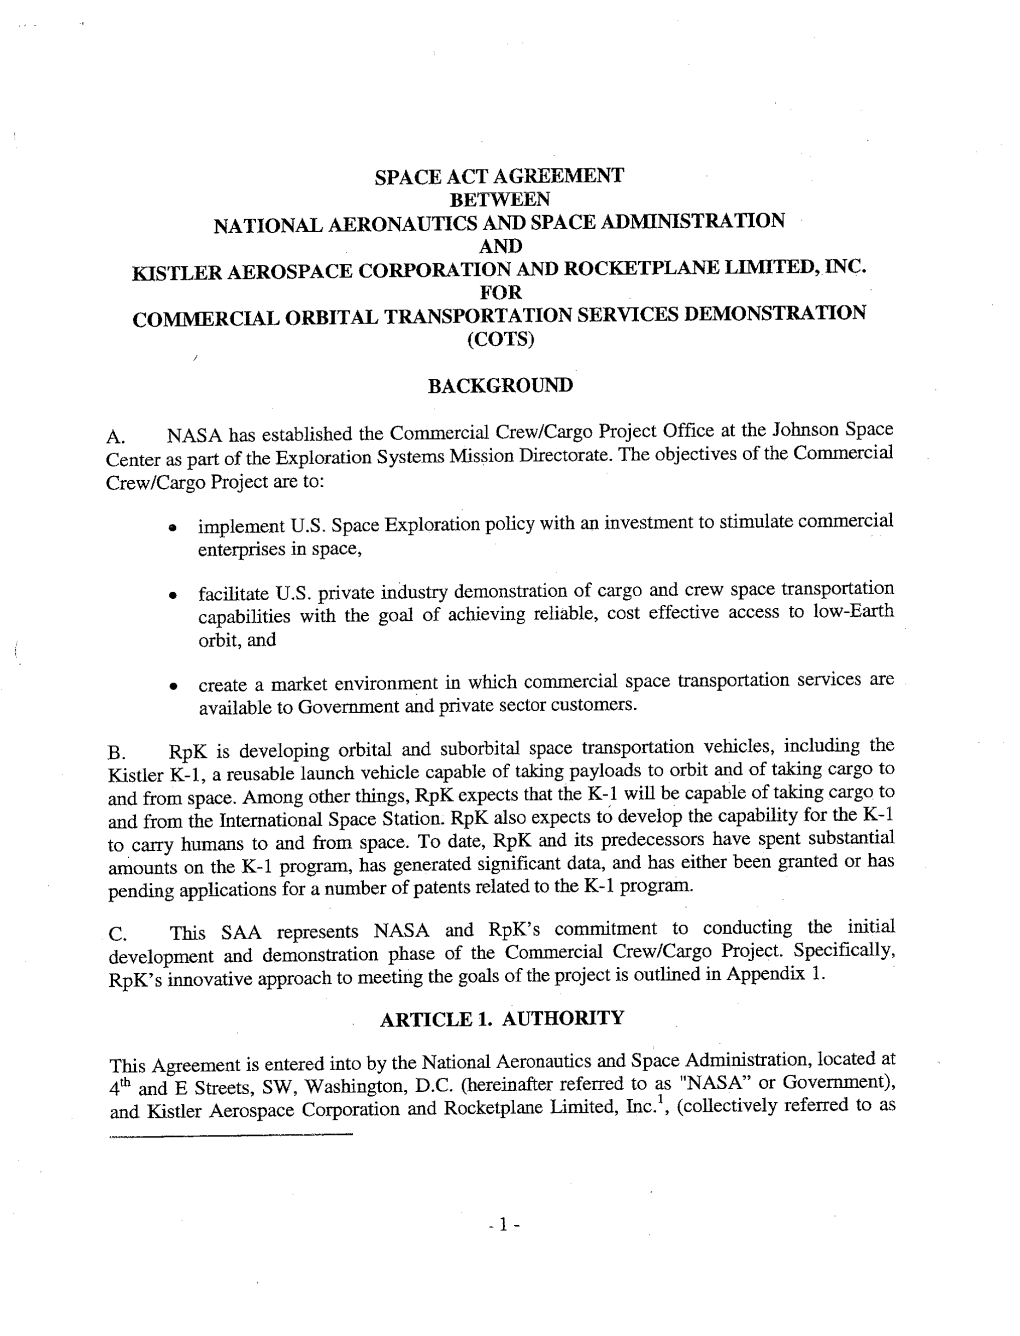 Space Act Agreement for Cots